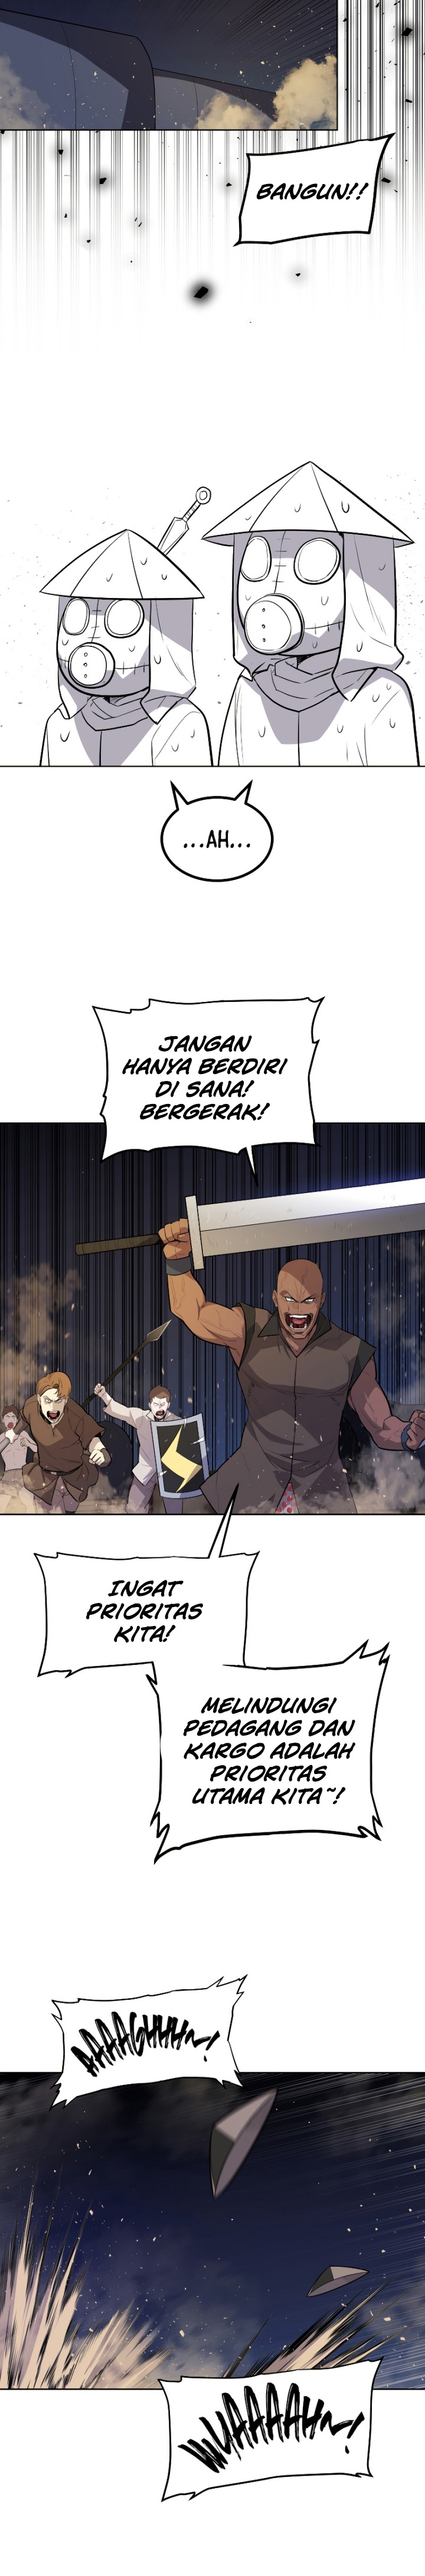 Overpowered Sword Chapter 59